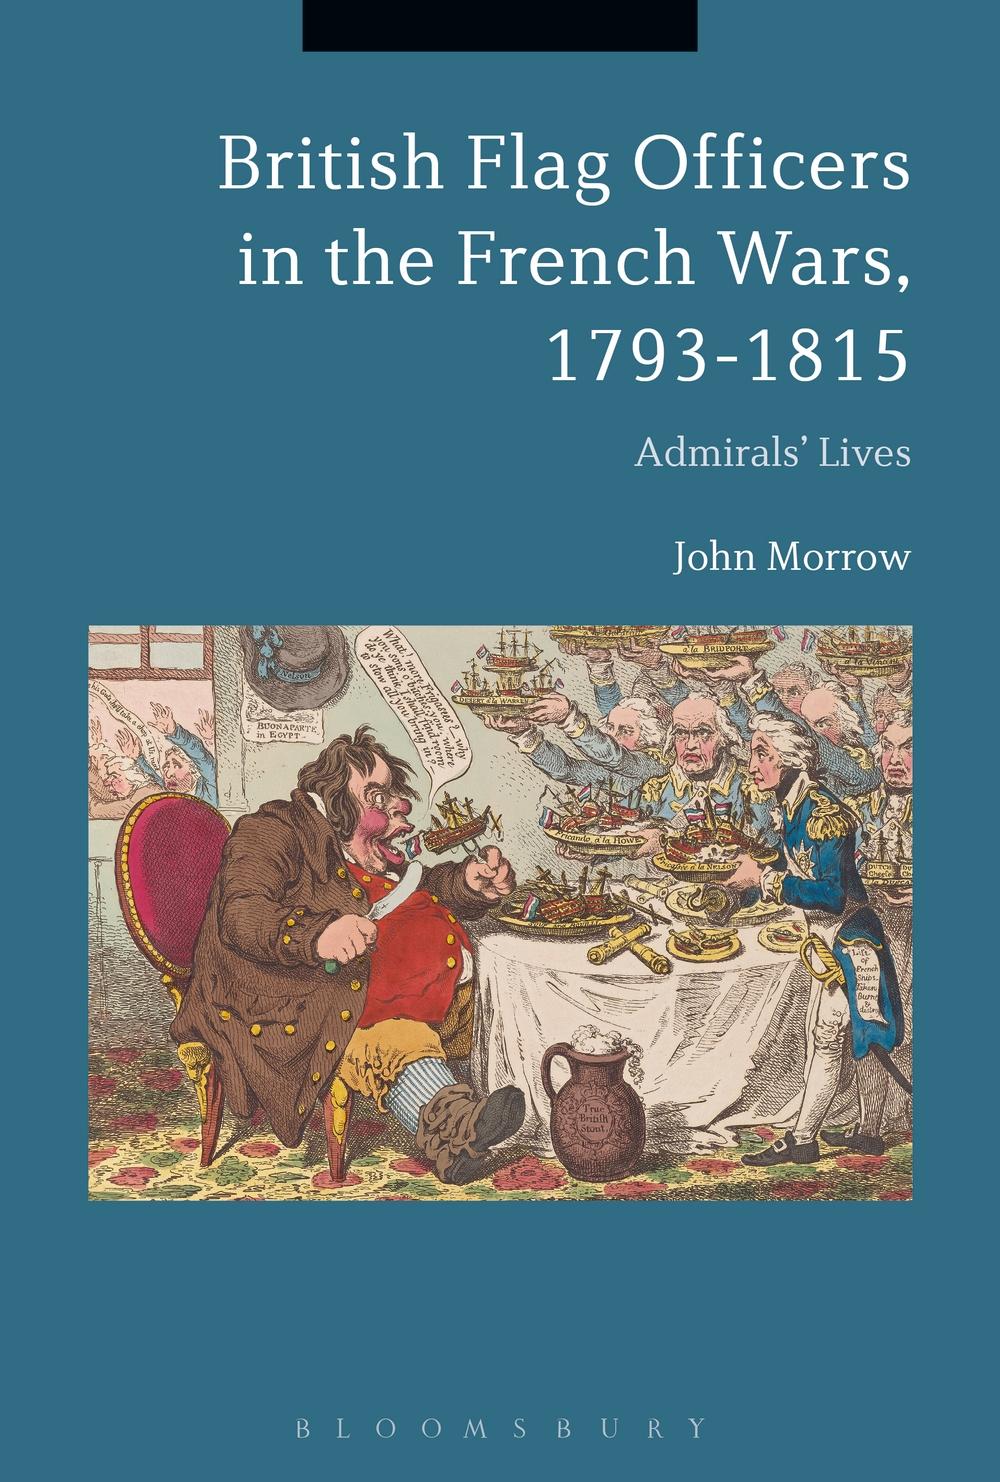 British Flag Officers in the French Wars, 1793-1815 - John Morrow